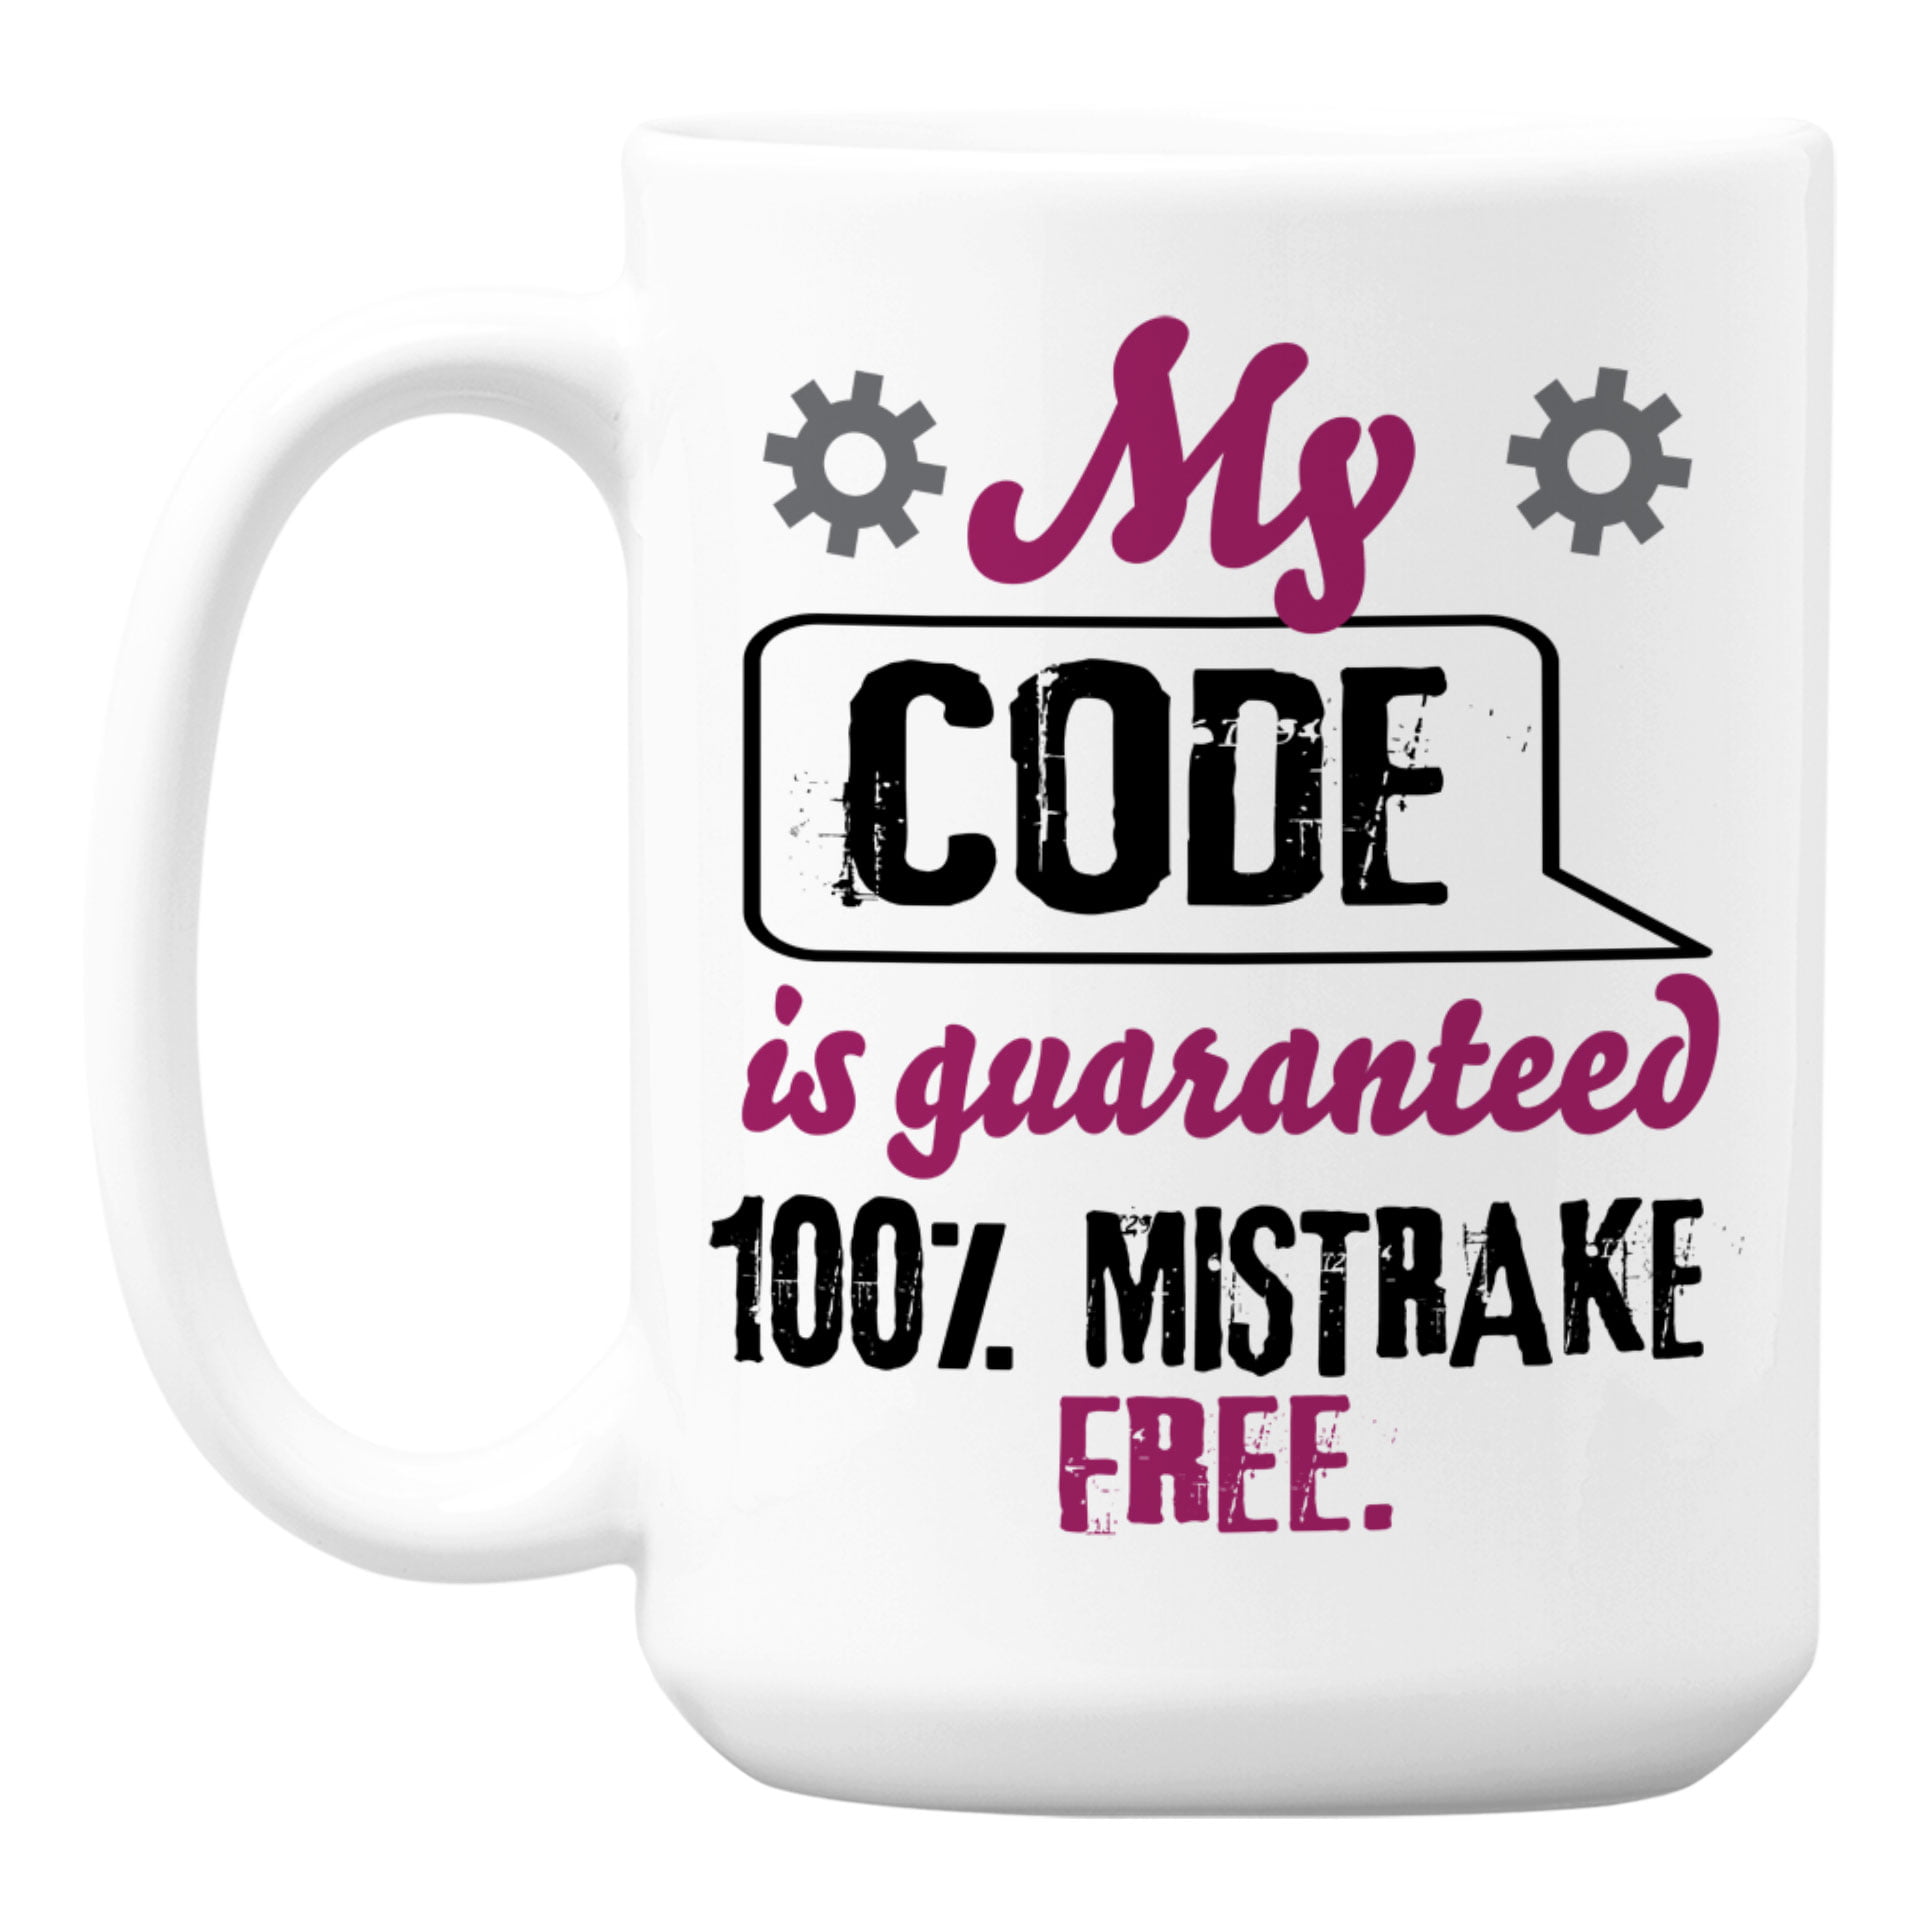 104 Coffee Mug Quotes to Match Any Personality